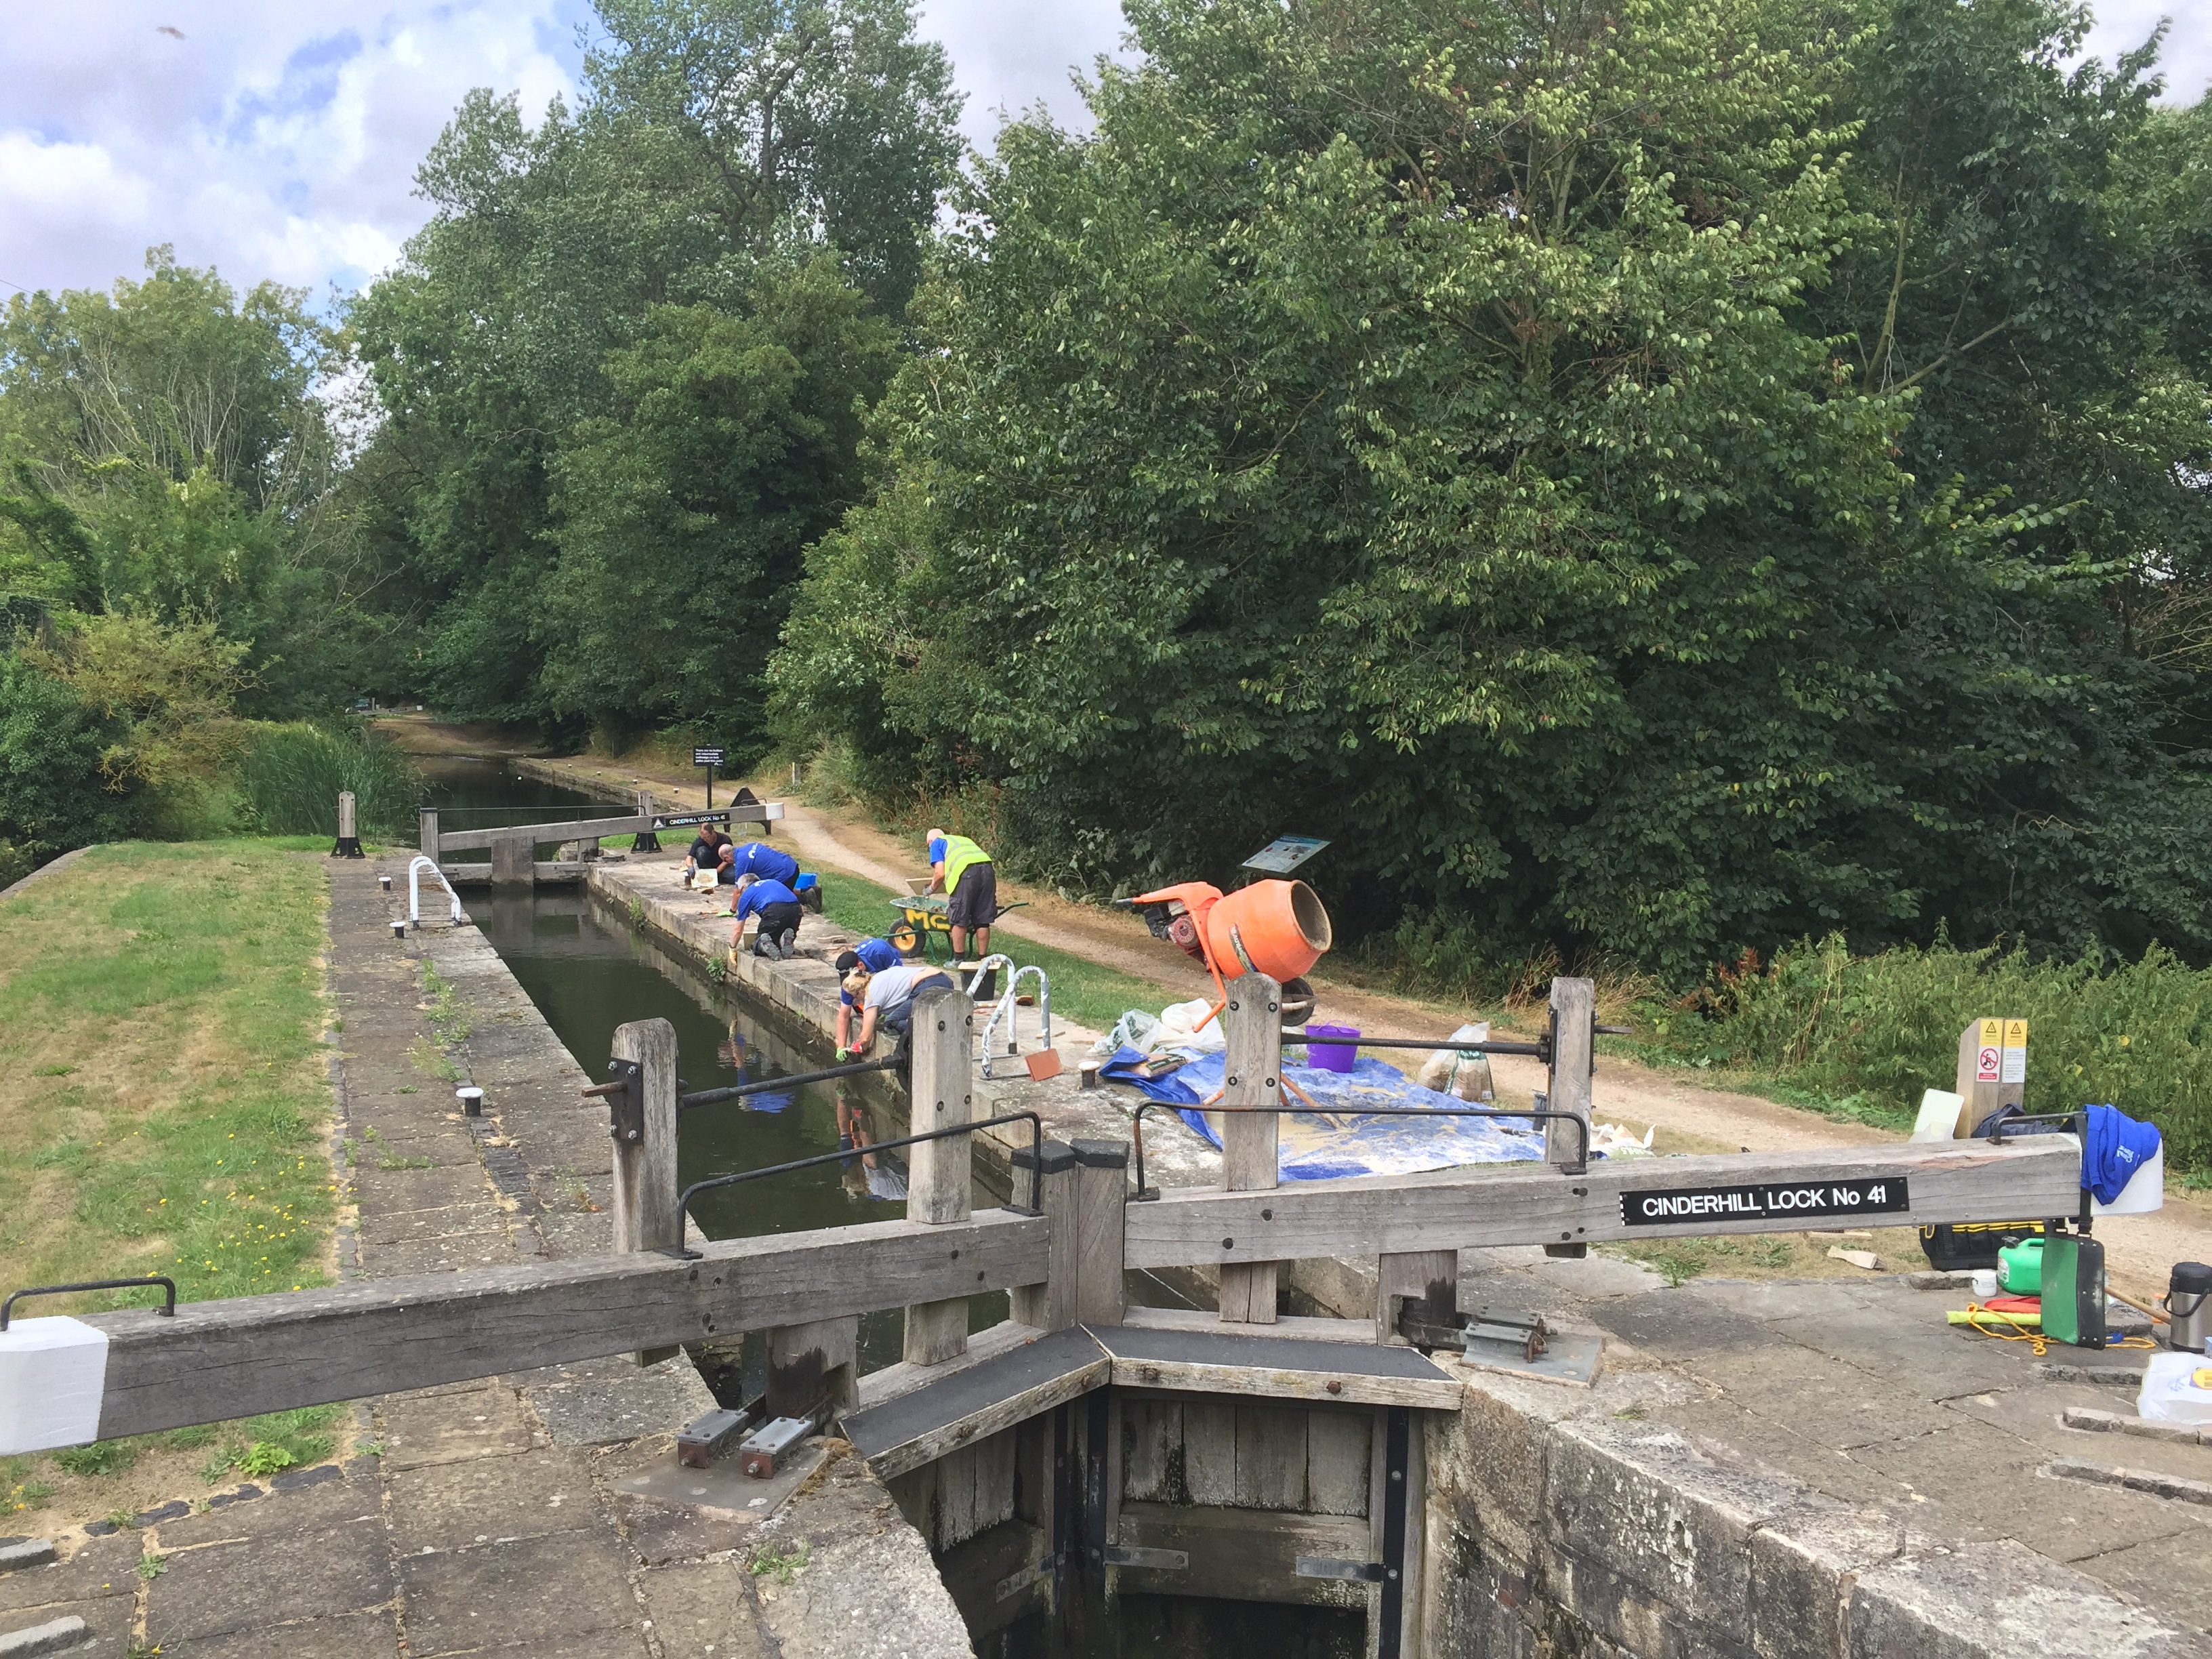 Working with volunteers on the Chesterfield Canal